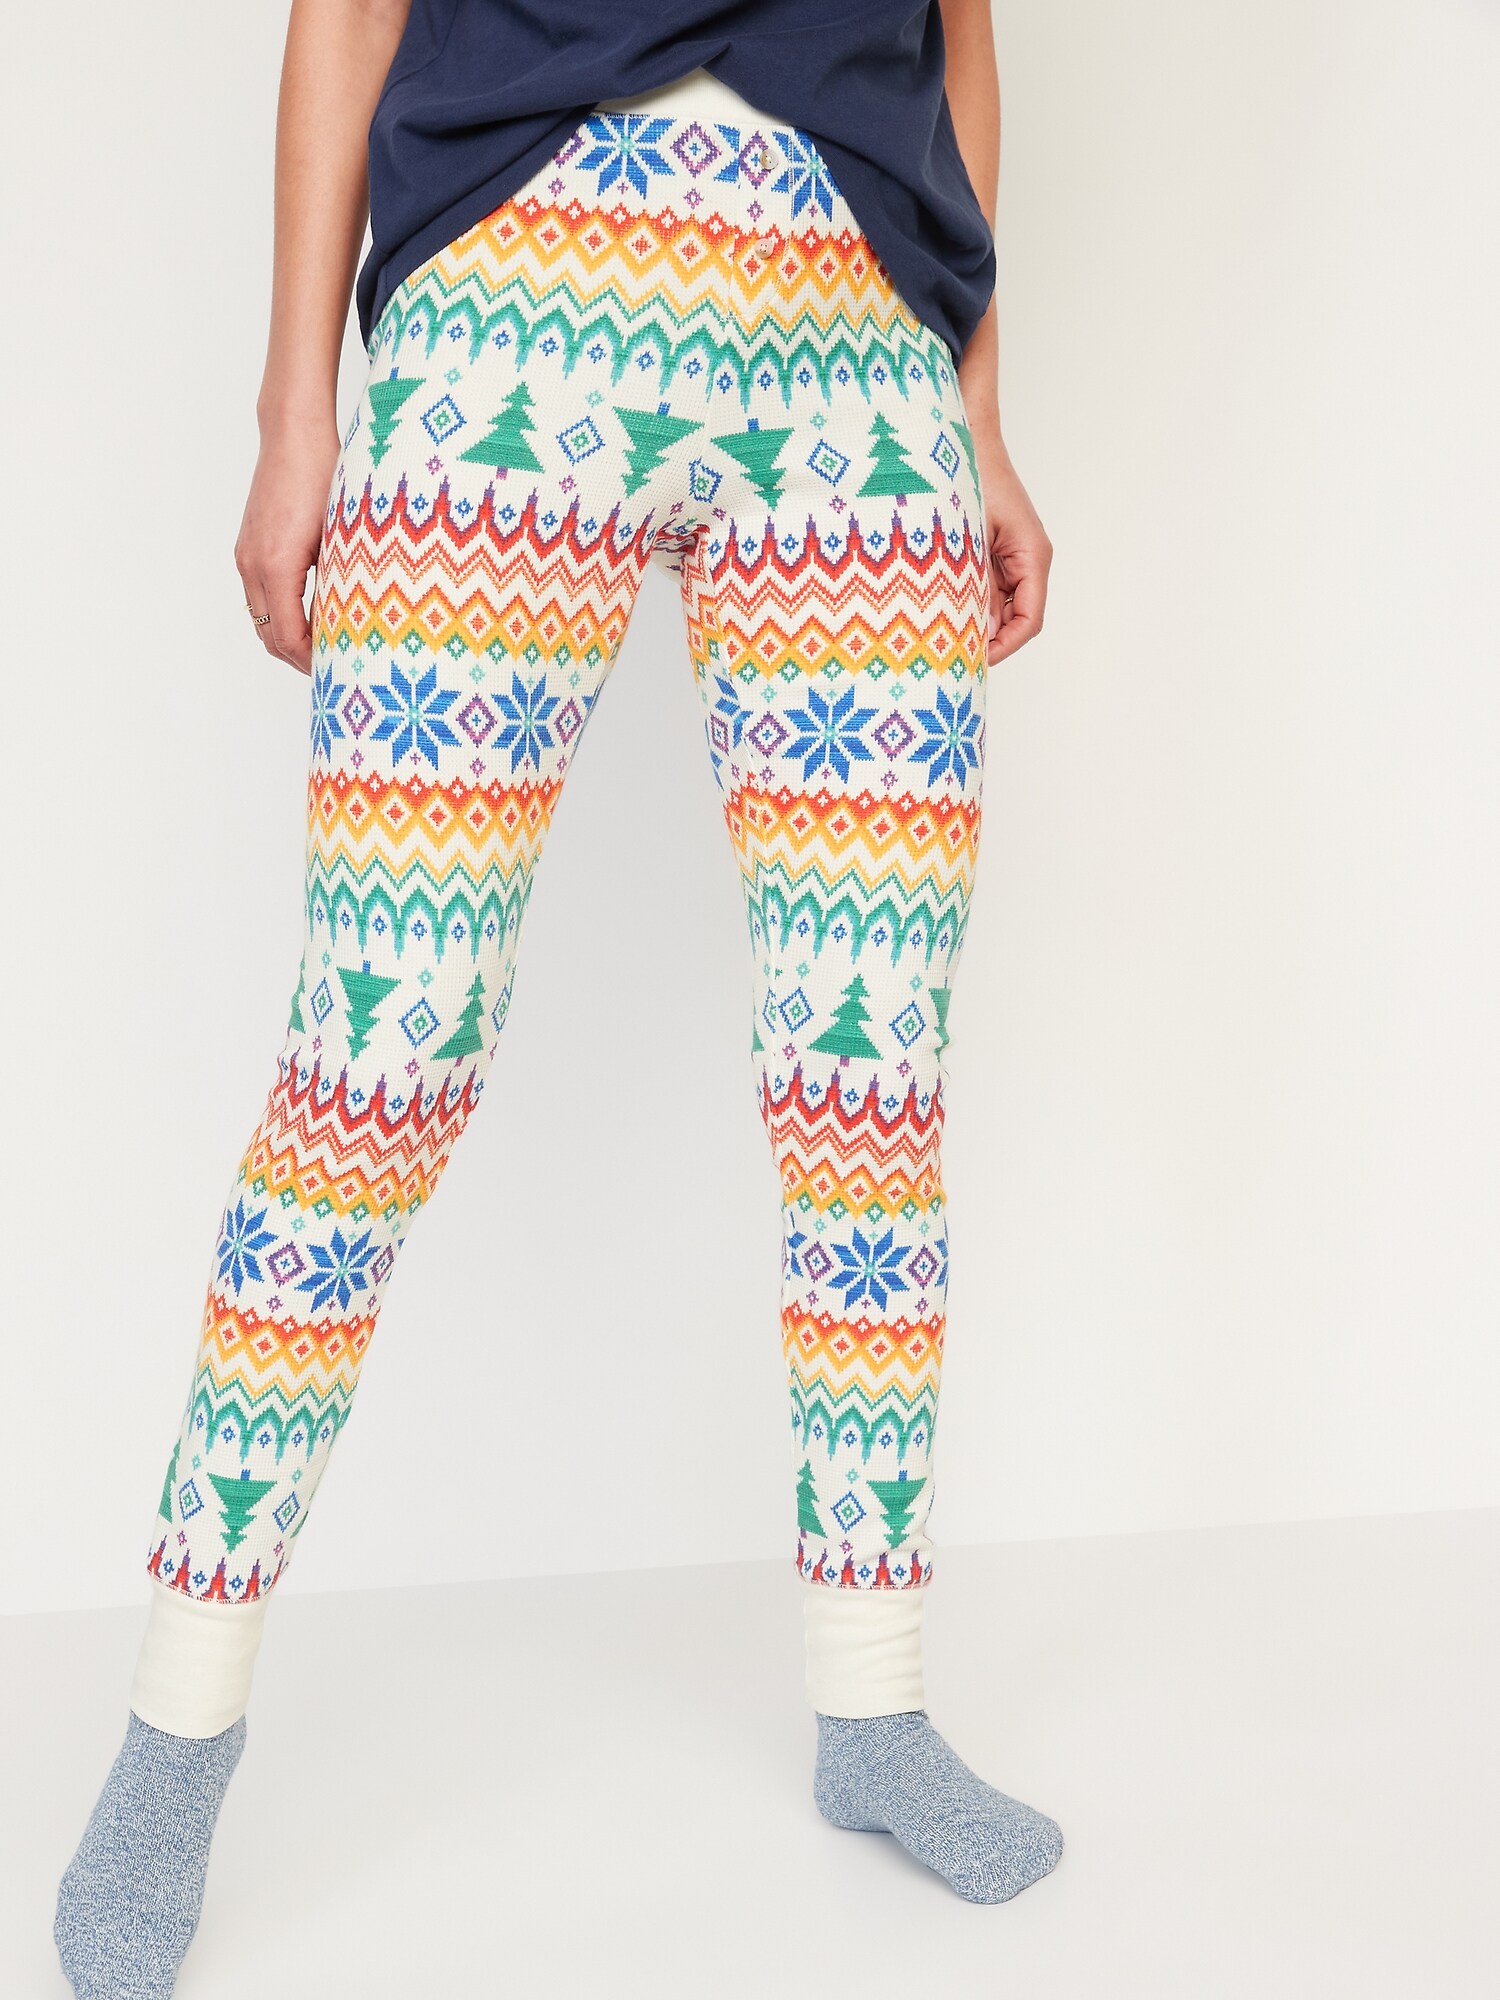 Matching printed thermal-knit pajama leggings for women offer at Old Navy